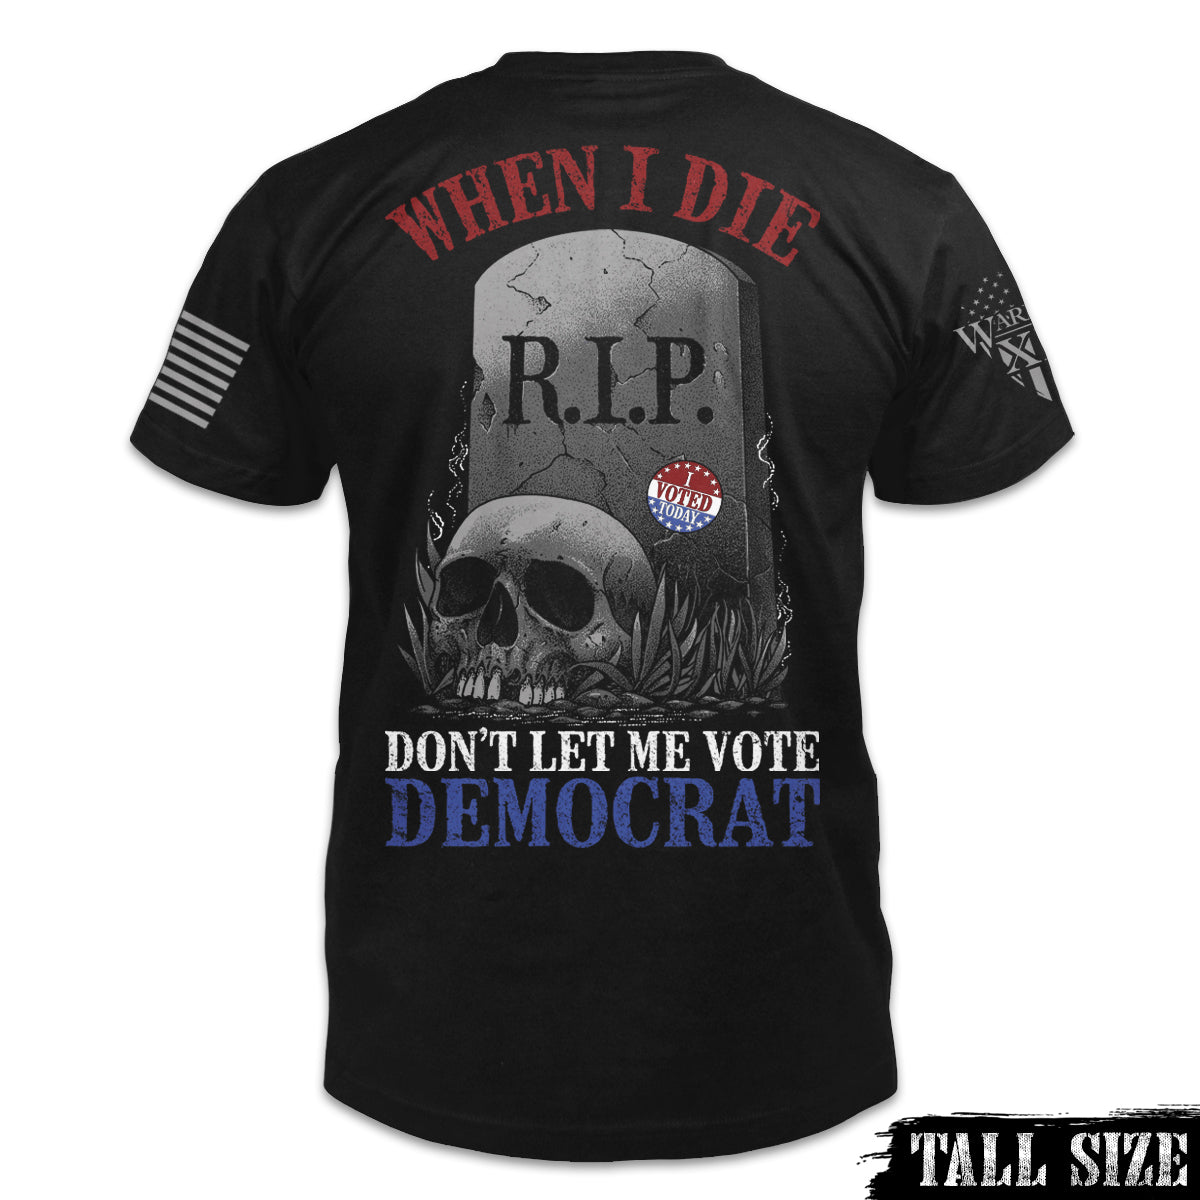 A black tall size shirt with the words "When I die, don't let me vote Democrat" with a gravestone and a skull printed on the back of the shirt.